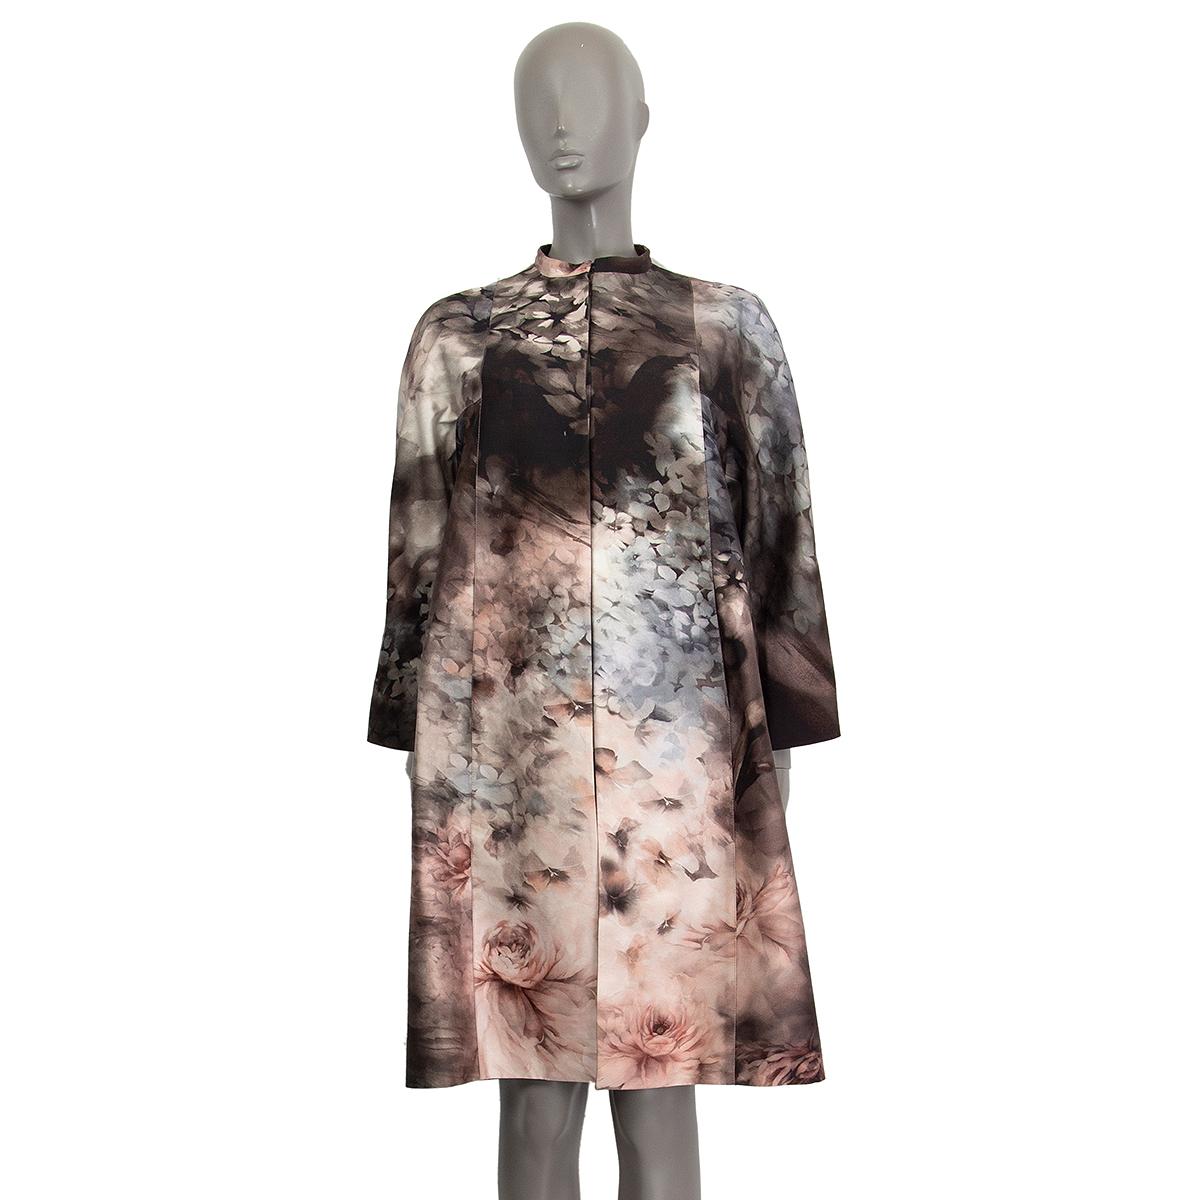 100% authentic Valentino flower print coat in espresso brown/brown/nude/grey/off-white/dirty rose cotton (79%) and silk (21%) featuring raglan sleeves and two slit pockets at front. Opens with six hidden buttons and is lined in black polyester